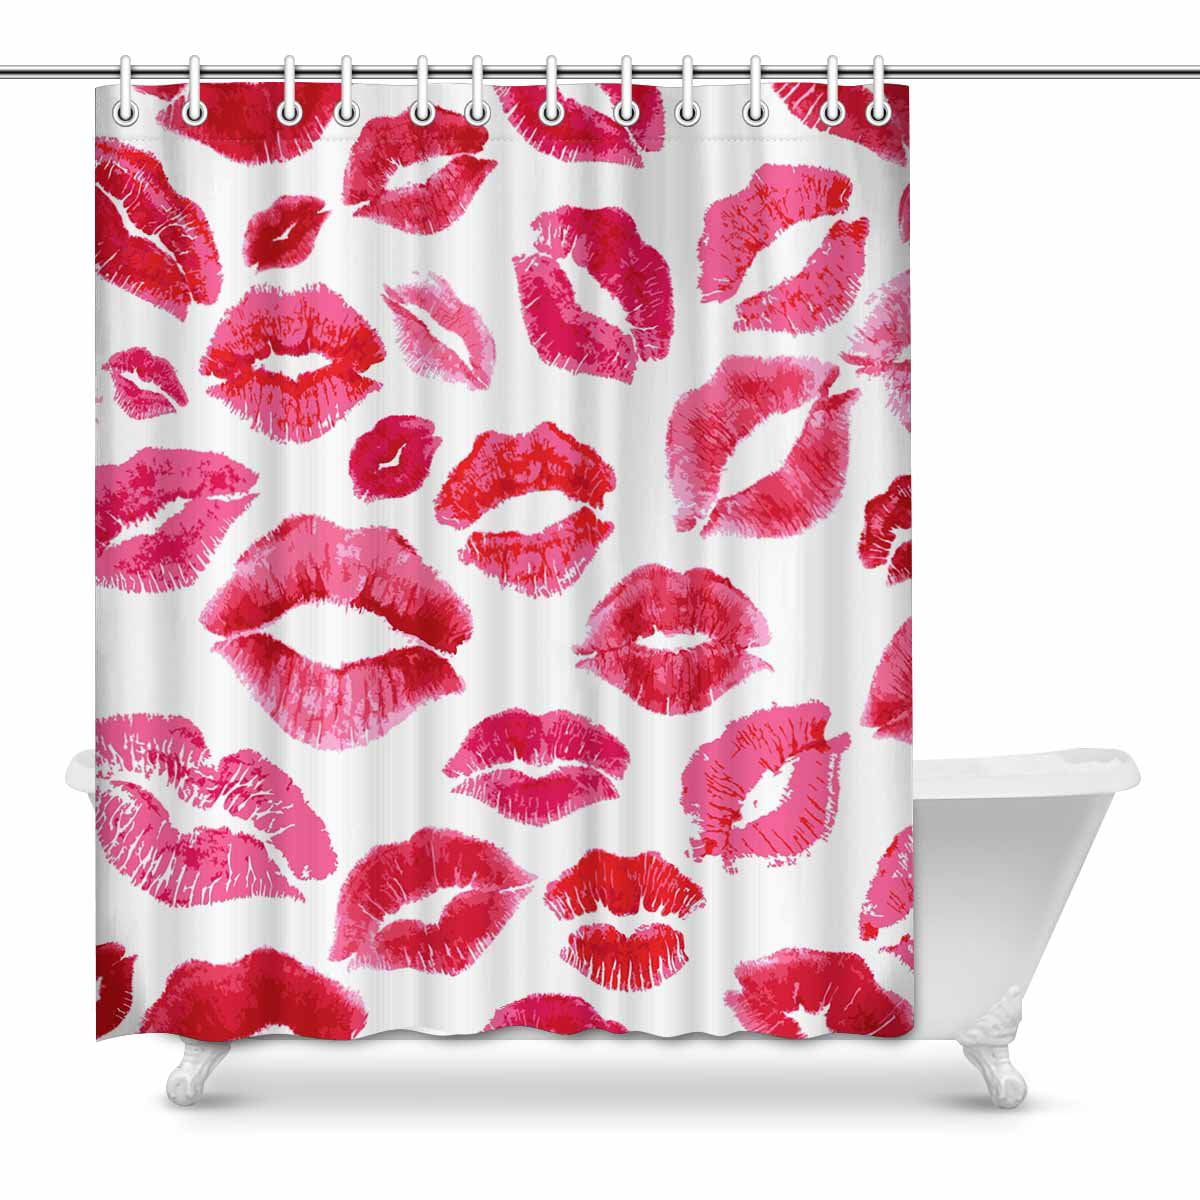 Details about   Sexy Kiss Lips Waterproof Polyester Fabric Bathroom Shower Curtain Art Decor 